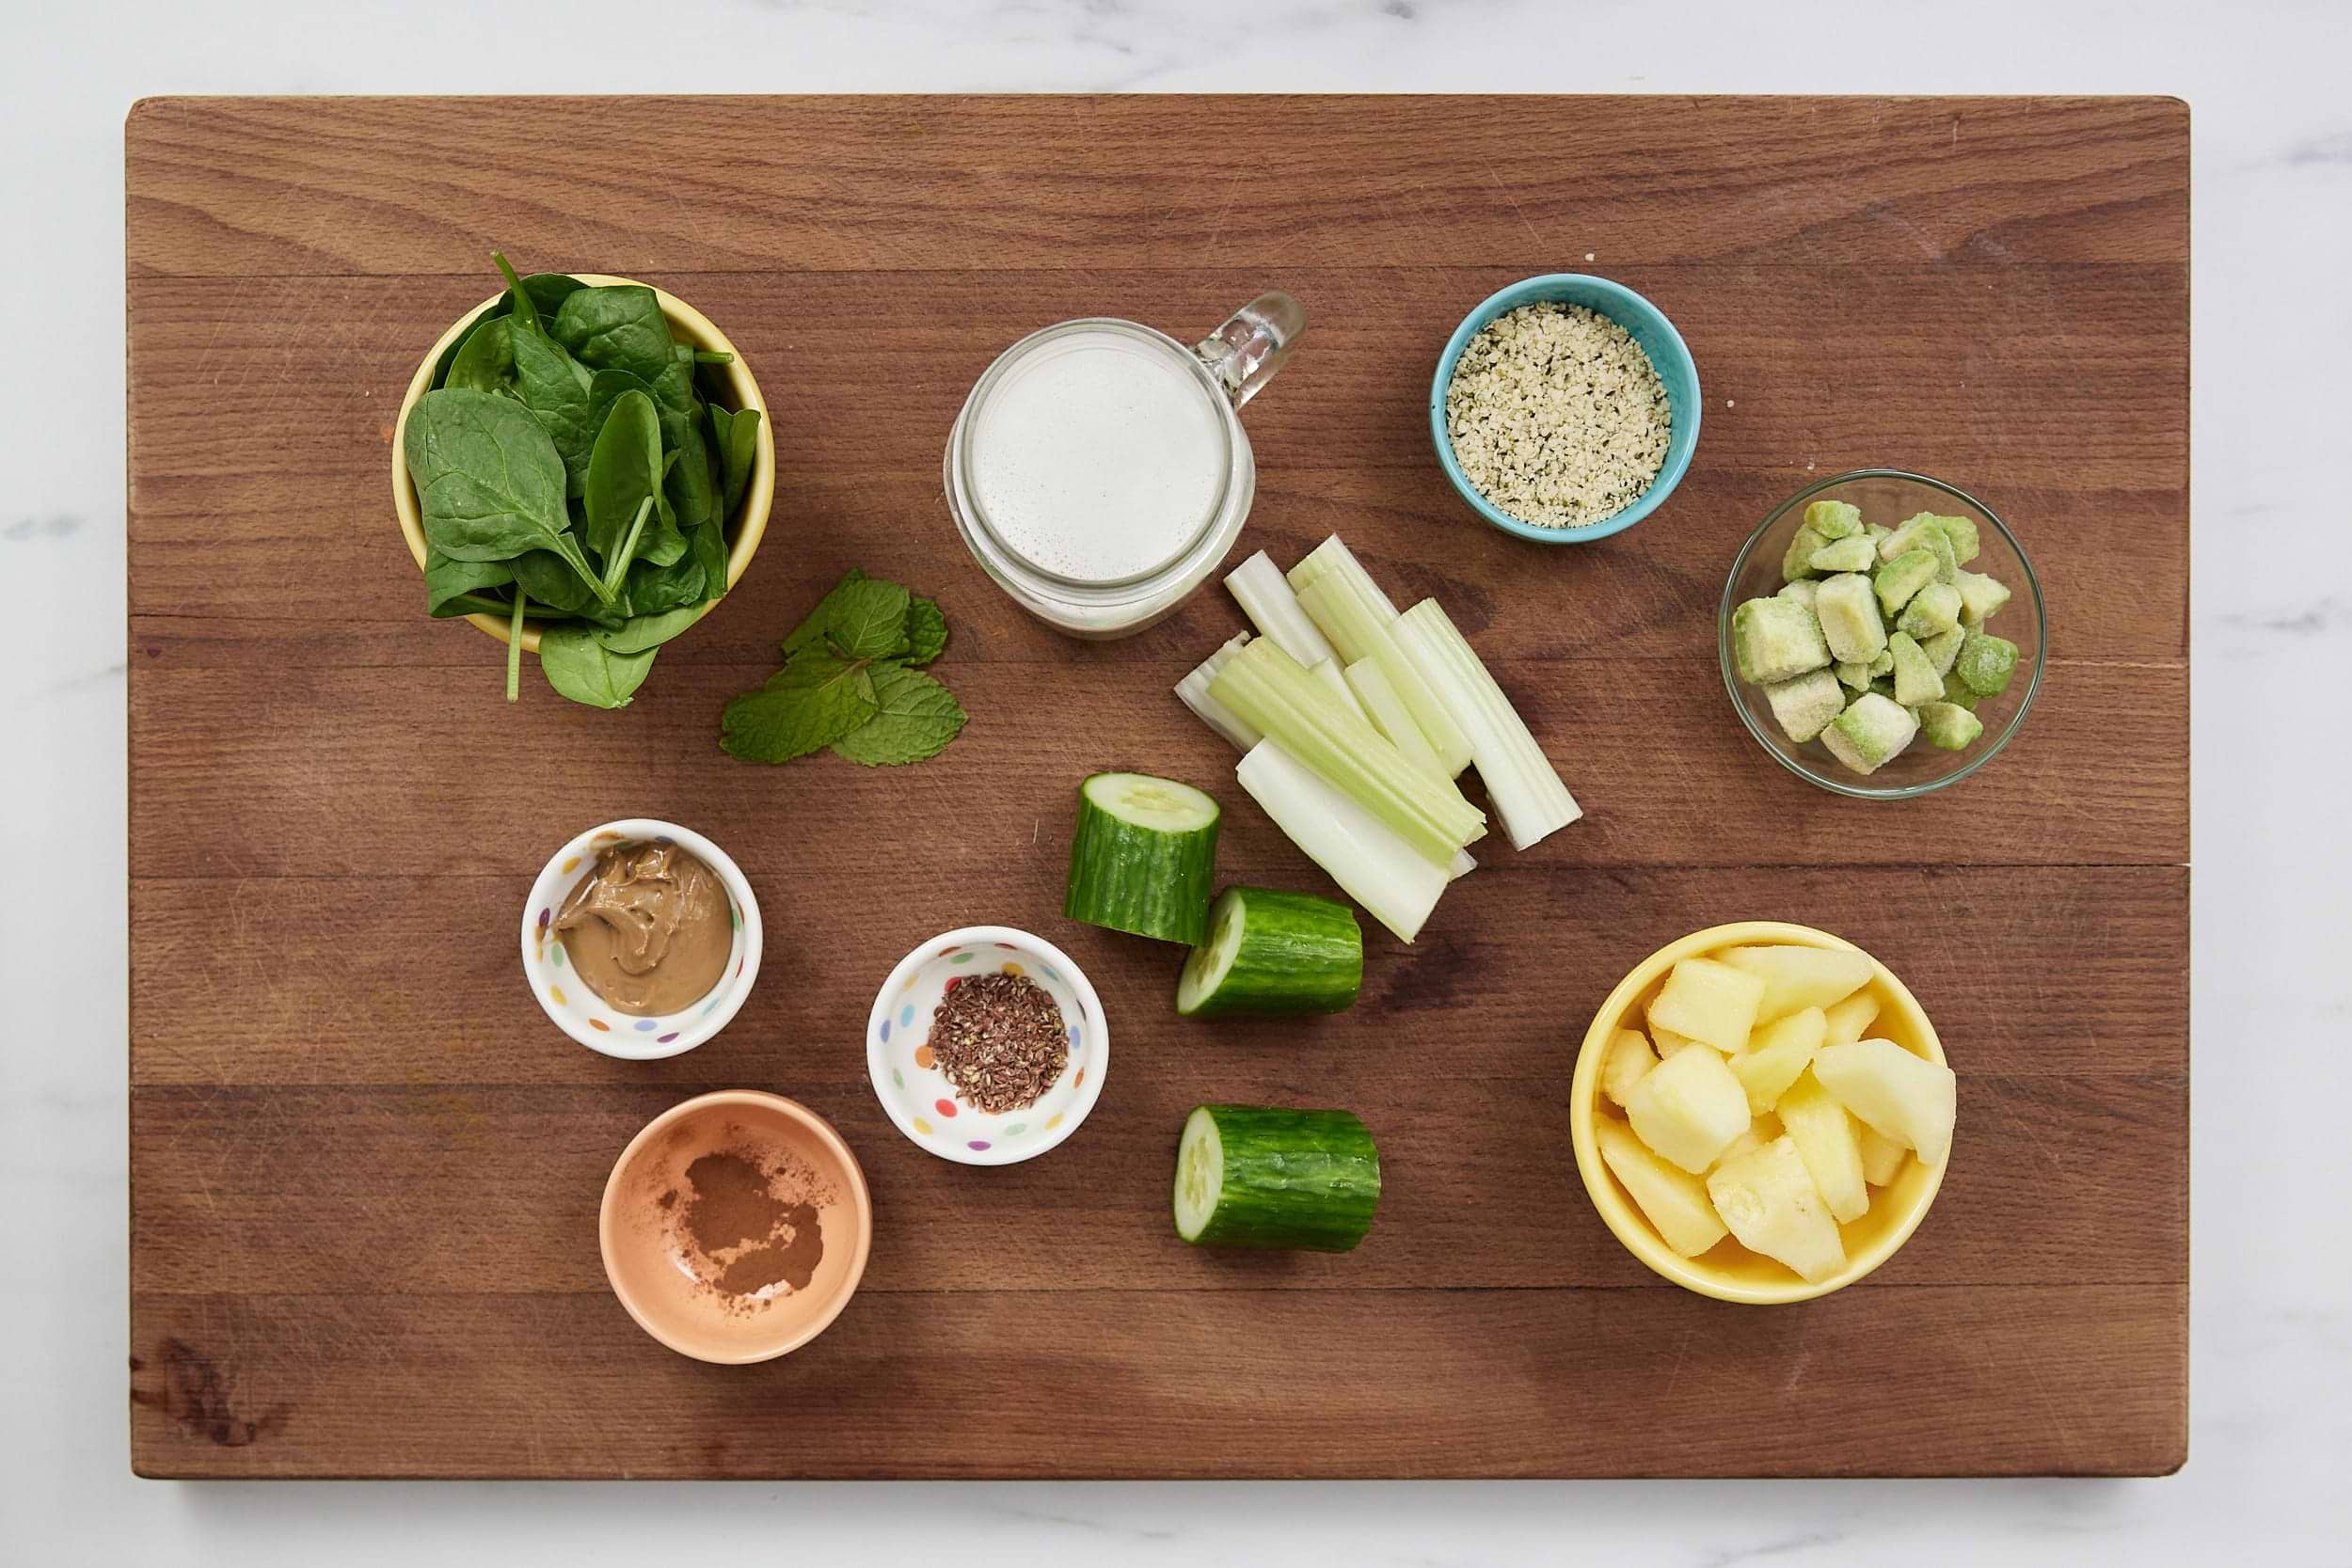 Ingredients for green smoothie